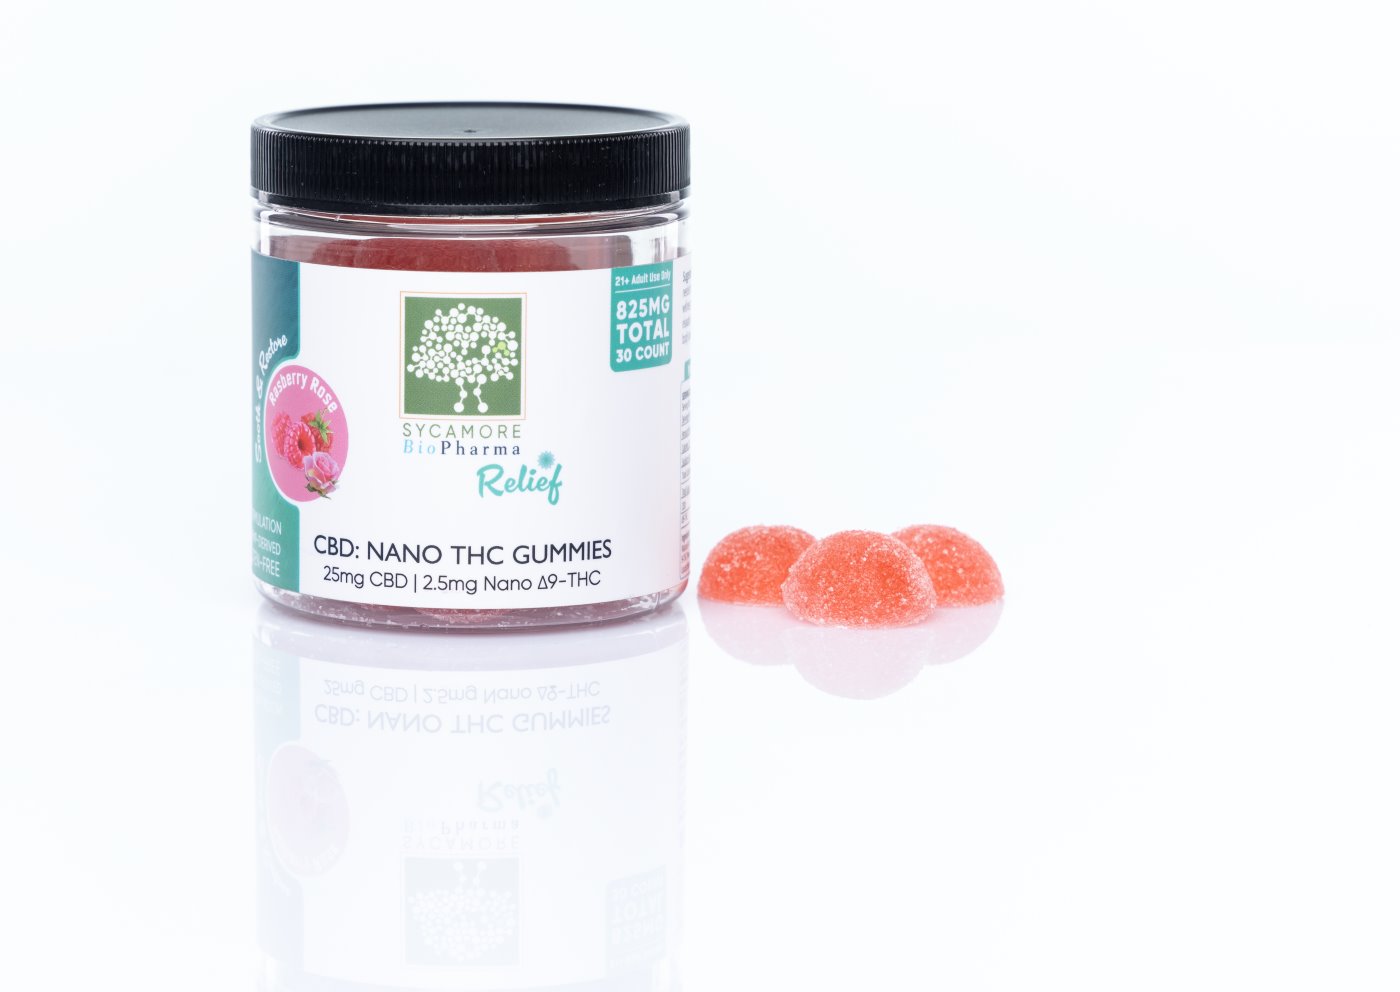 Sycamore BioPharma CBD Delta-9 THC blend edible gummies. 25mg CBD, 2.5mg THC. 30 count. For general relief and pain relief.